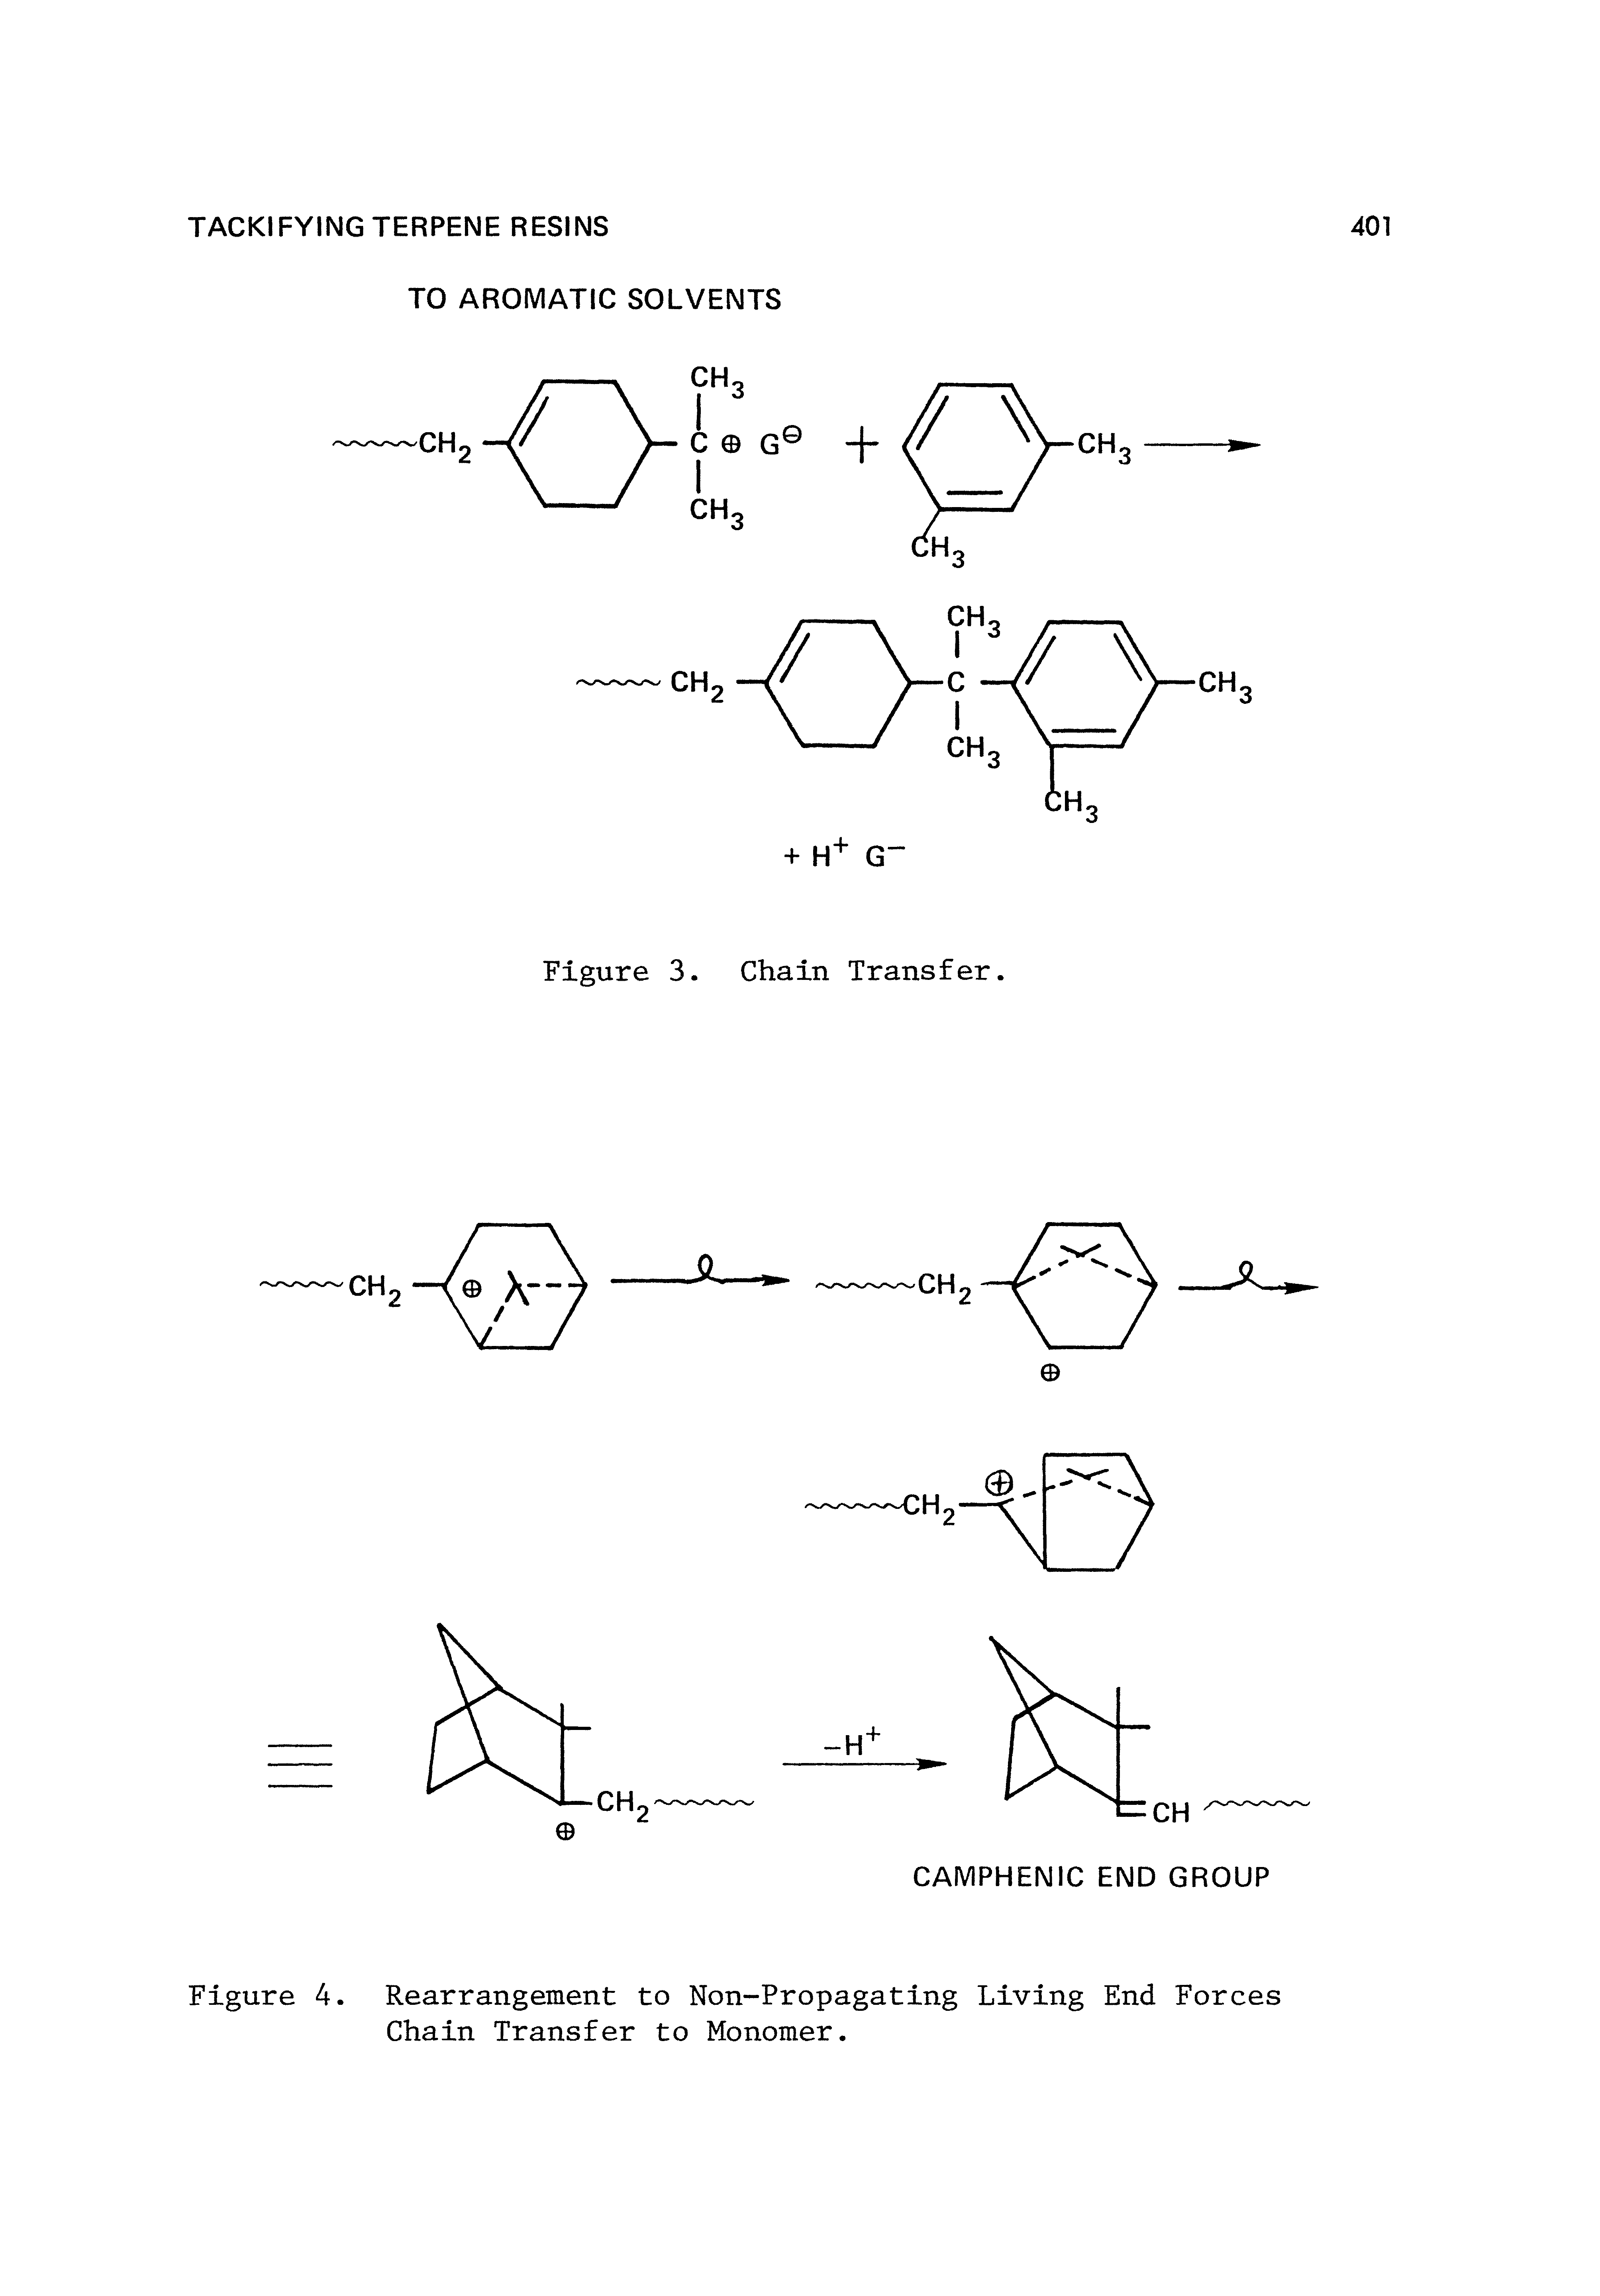 Figure 4. Rearrangement to Non-Propagating Living End Forces Chain Transfer to Monomer.